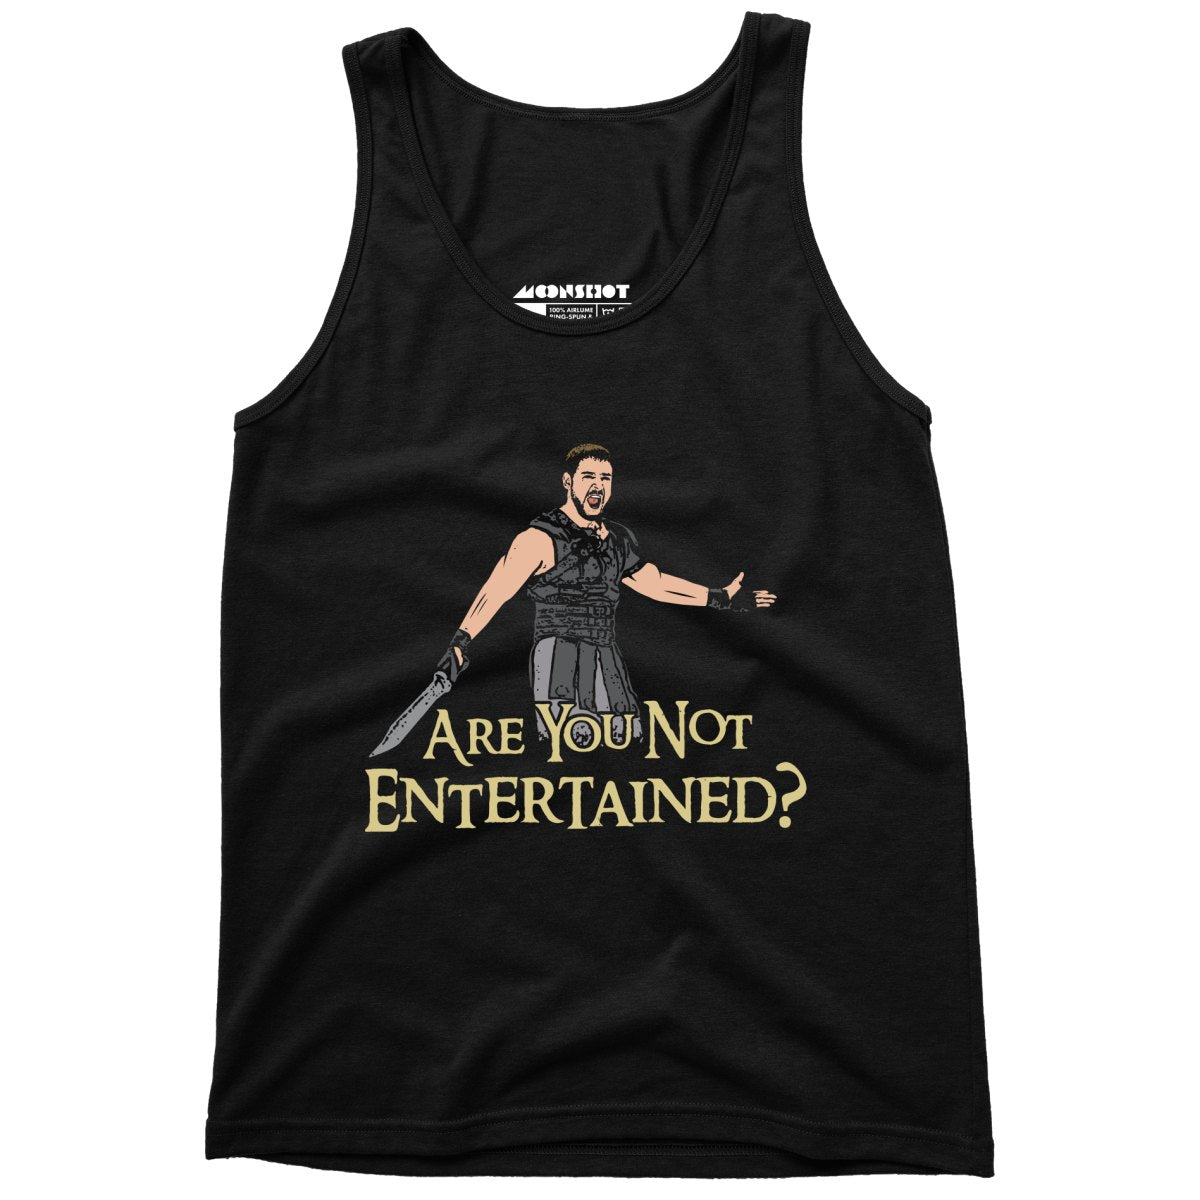 Are You Not Entertained? - Unisex Tank Top